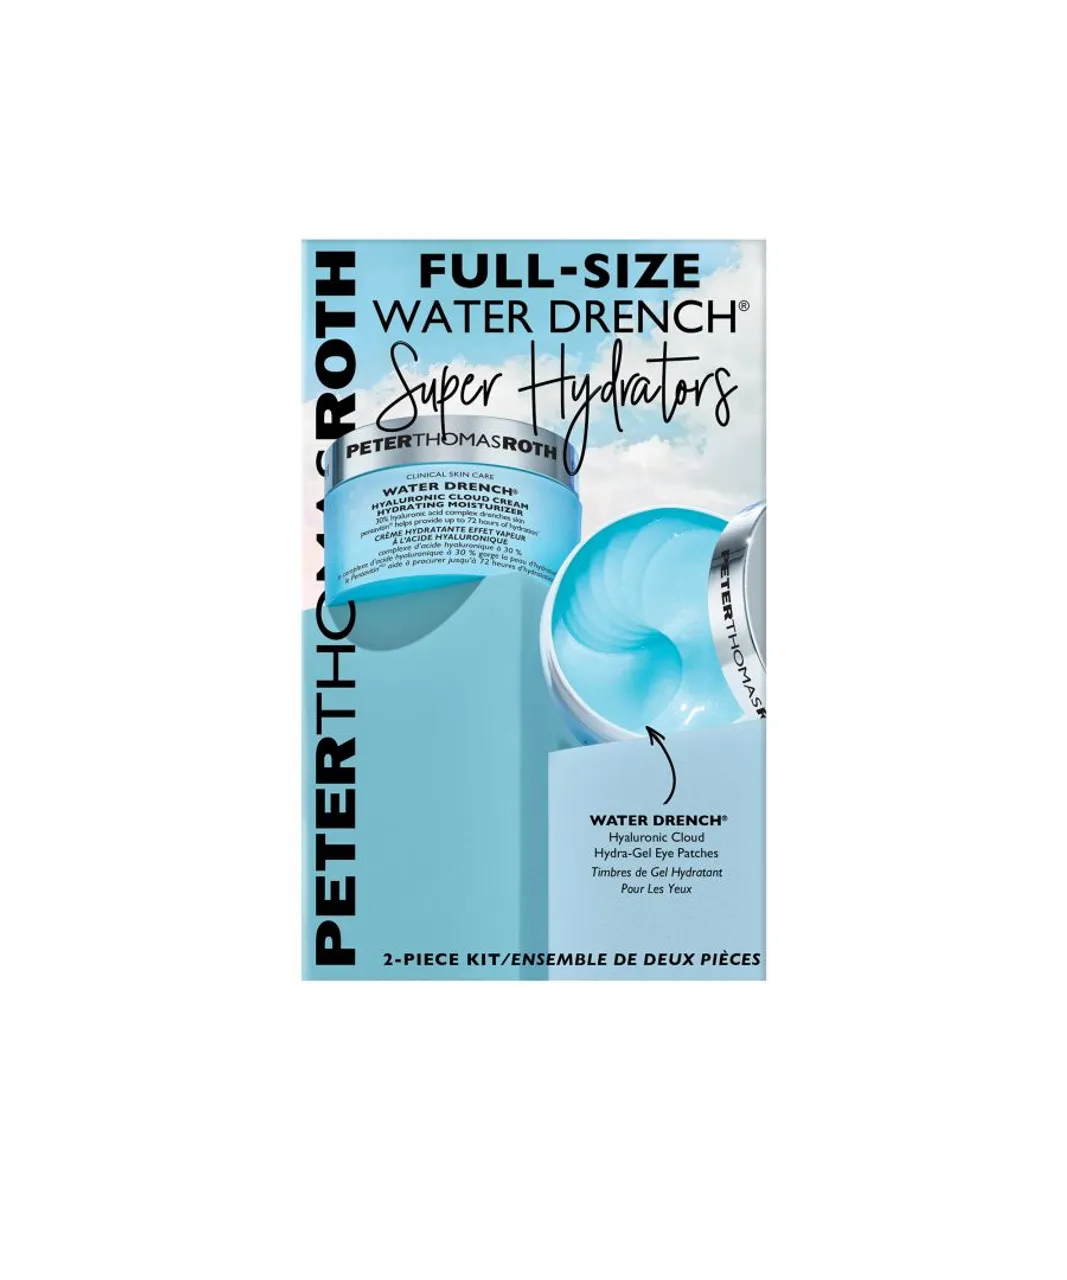 Peter Thomas Roth Unisex Full-Size Water Drench Super Hydrators 2-Piece Kit - One Size